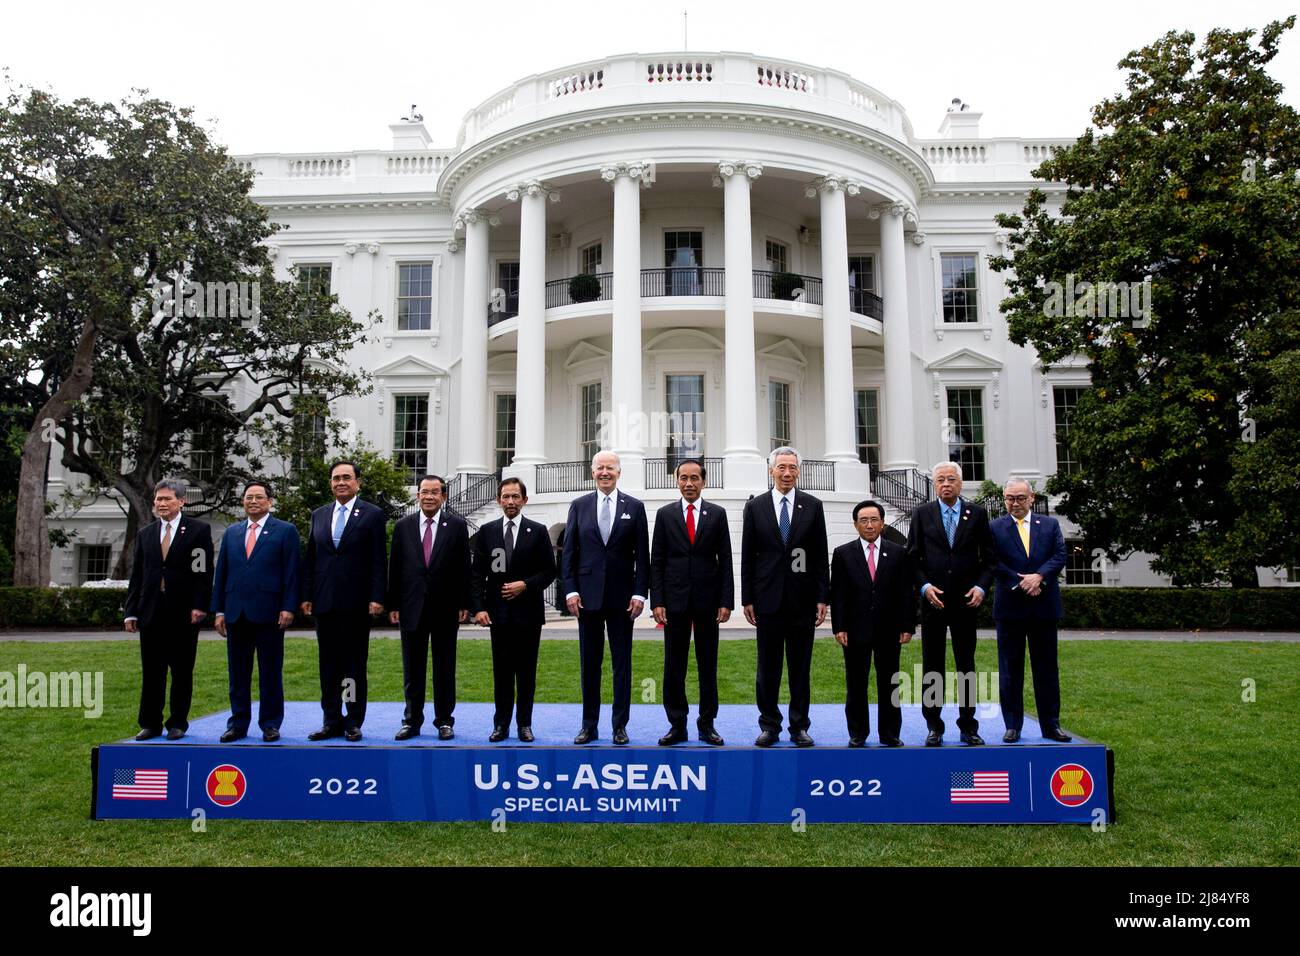 Washington, DC, USA, 12 May 2022. US President Joe Biden (C) poses with leaders of the US-ASEAN Special Summit during a family photo on the South Lawn of the White House in Washington, DC, USA, 12 May 2022. Also in this picture (L to R); Dato Lim Jock Hoi, Secretary-General of the Association for Southeast Asian Nations; Prime Minister of Vietnam Pham Minh Chinh; Prime Minister of Thailand Prayut Chan-o-cha; Prime Minister of Cambodia Hun Sen; Sultan Haji Hassanal Bolkiah of Brunei; President of Indonesia Joko Widodo; Prime Minister of the Republic of Singapore Lee Hsien Loong; Prime Minister  Stock Photo